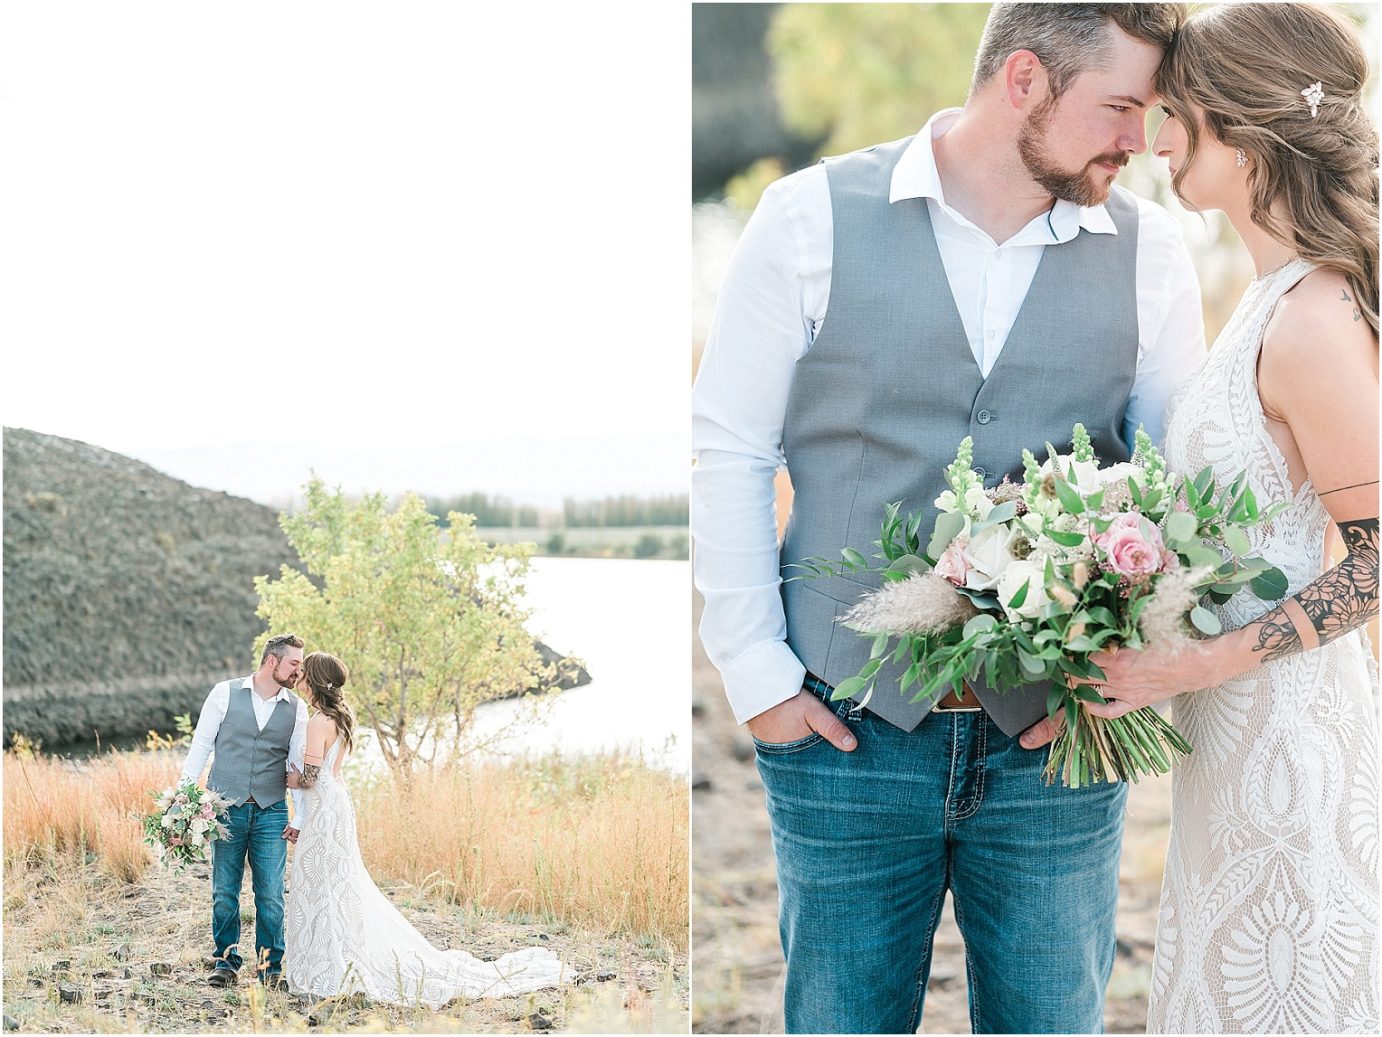 Eastern Washington Elopement Photographer Mike and Carley boho bridal bouquet with pink and greens